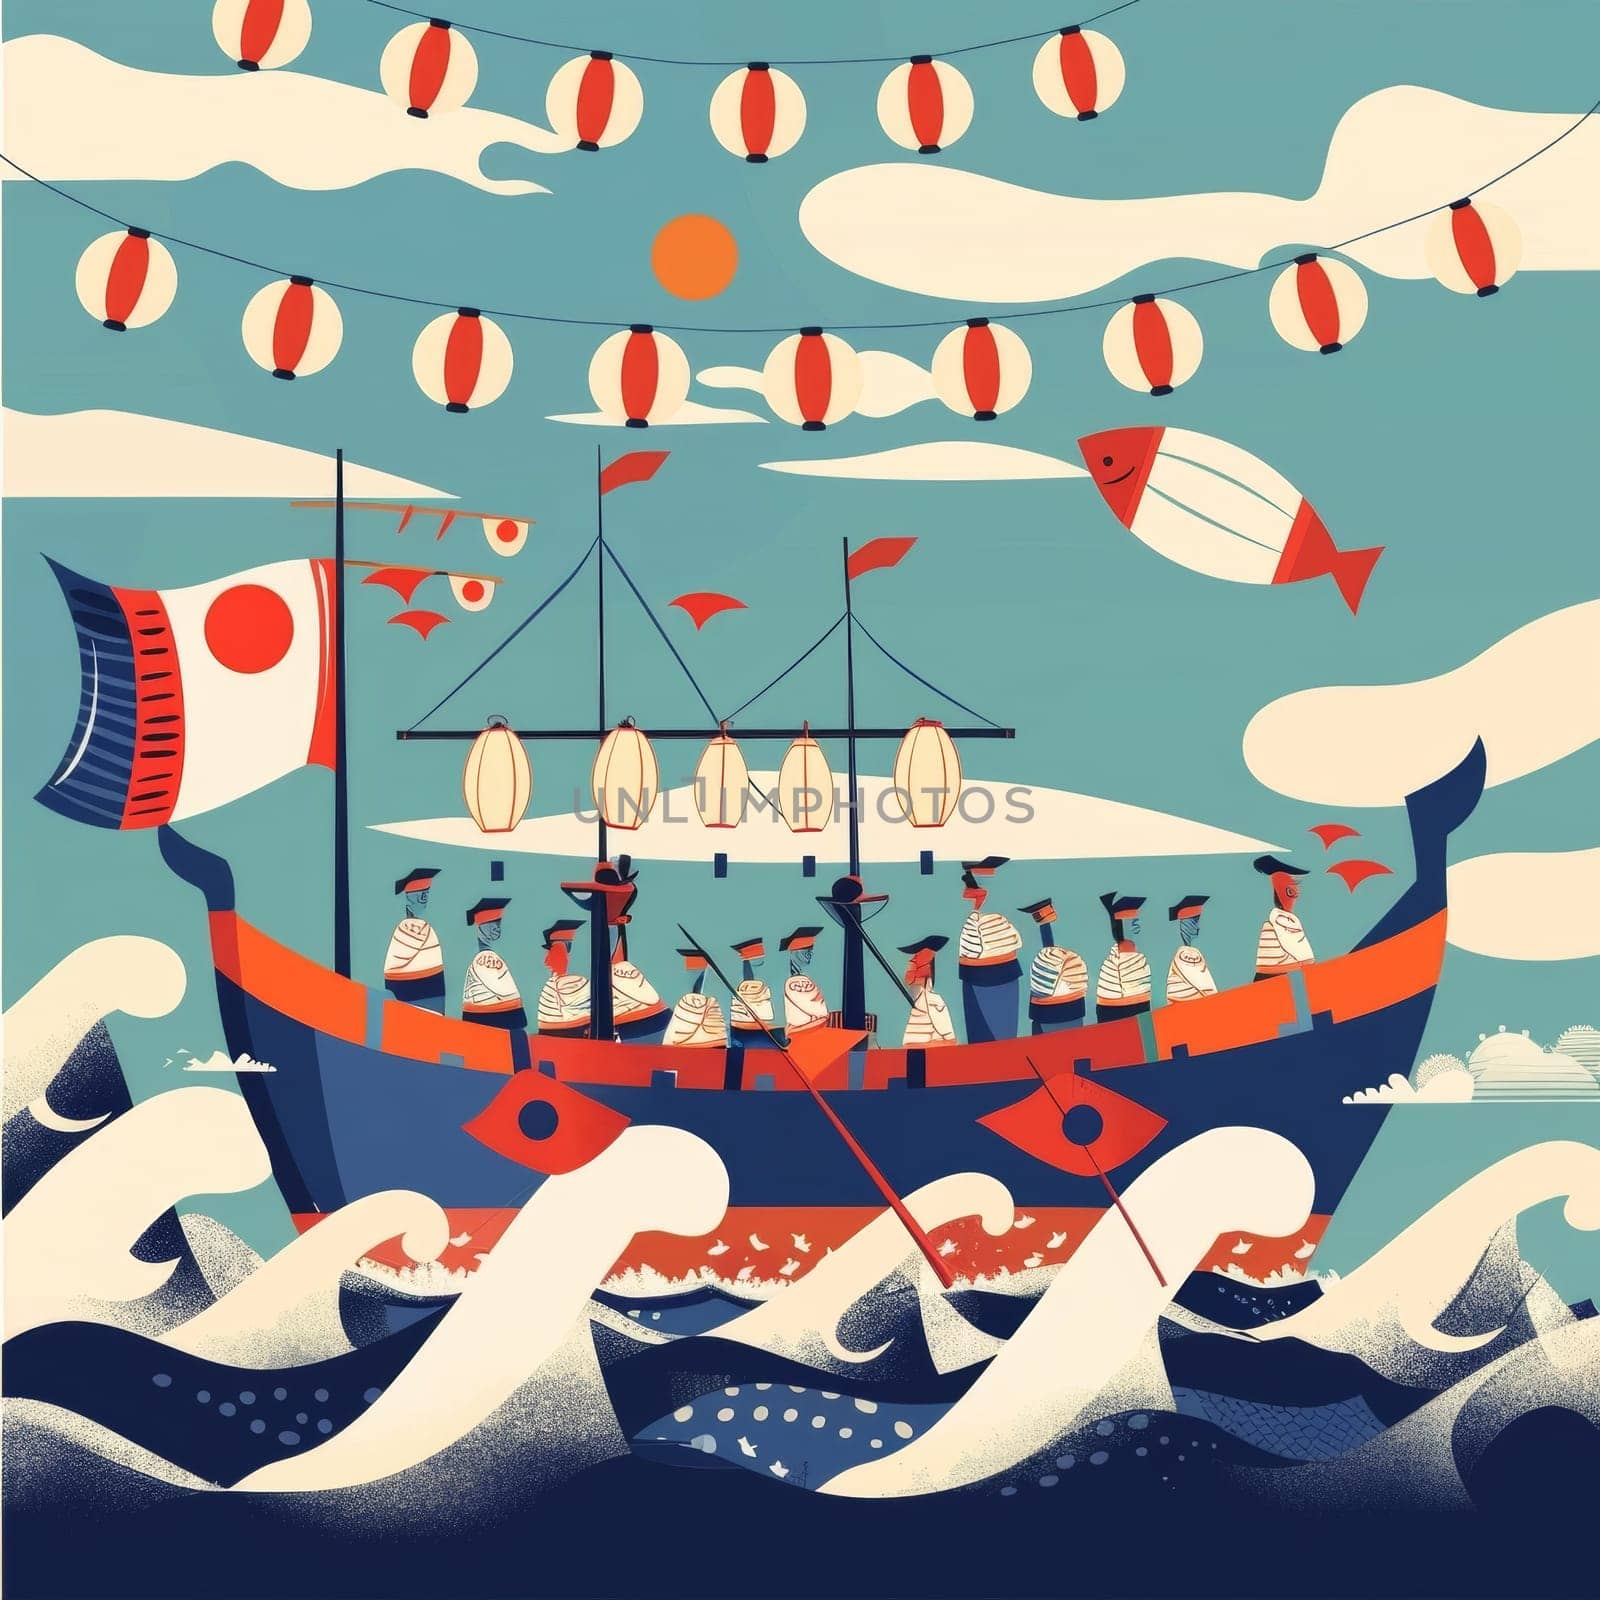 A vibrant and whimsical scene of a lively sea-faring celebration, with a parade of ships, lanterns, and an array of colorful marine creatures